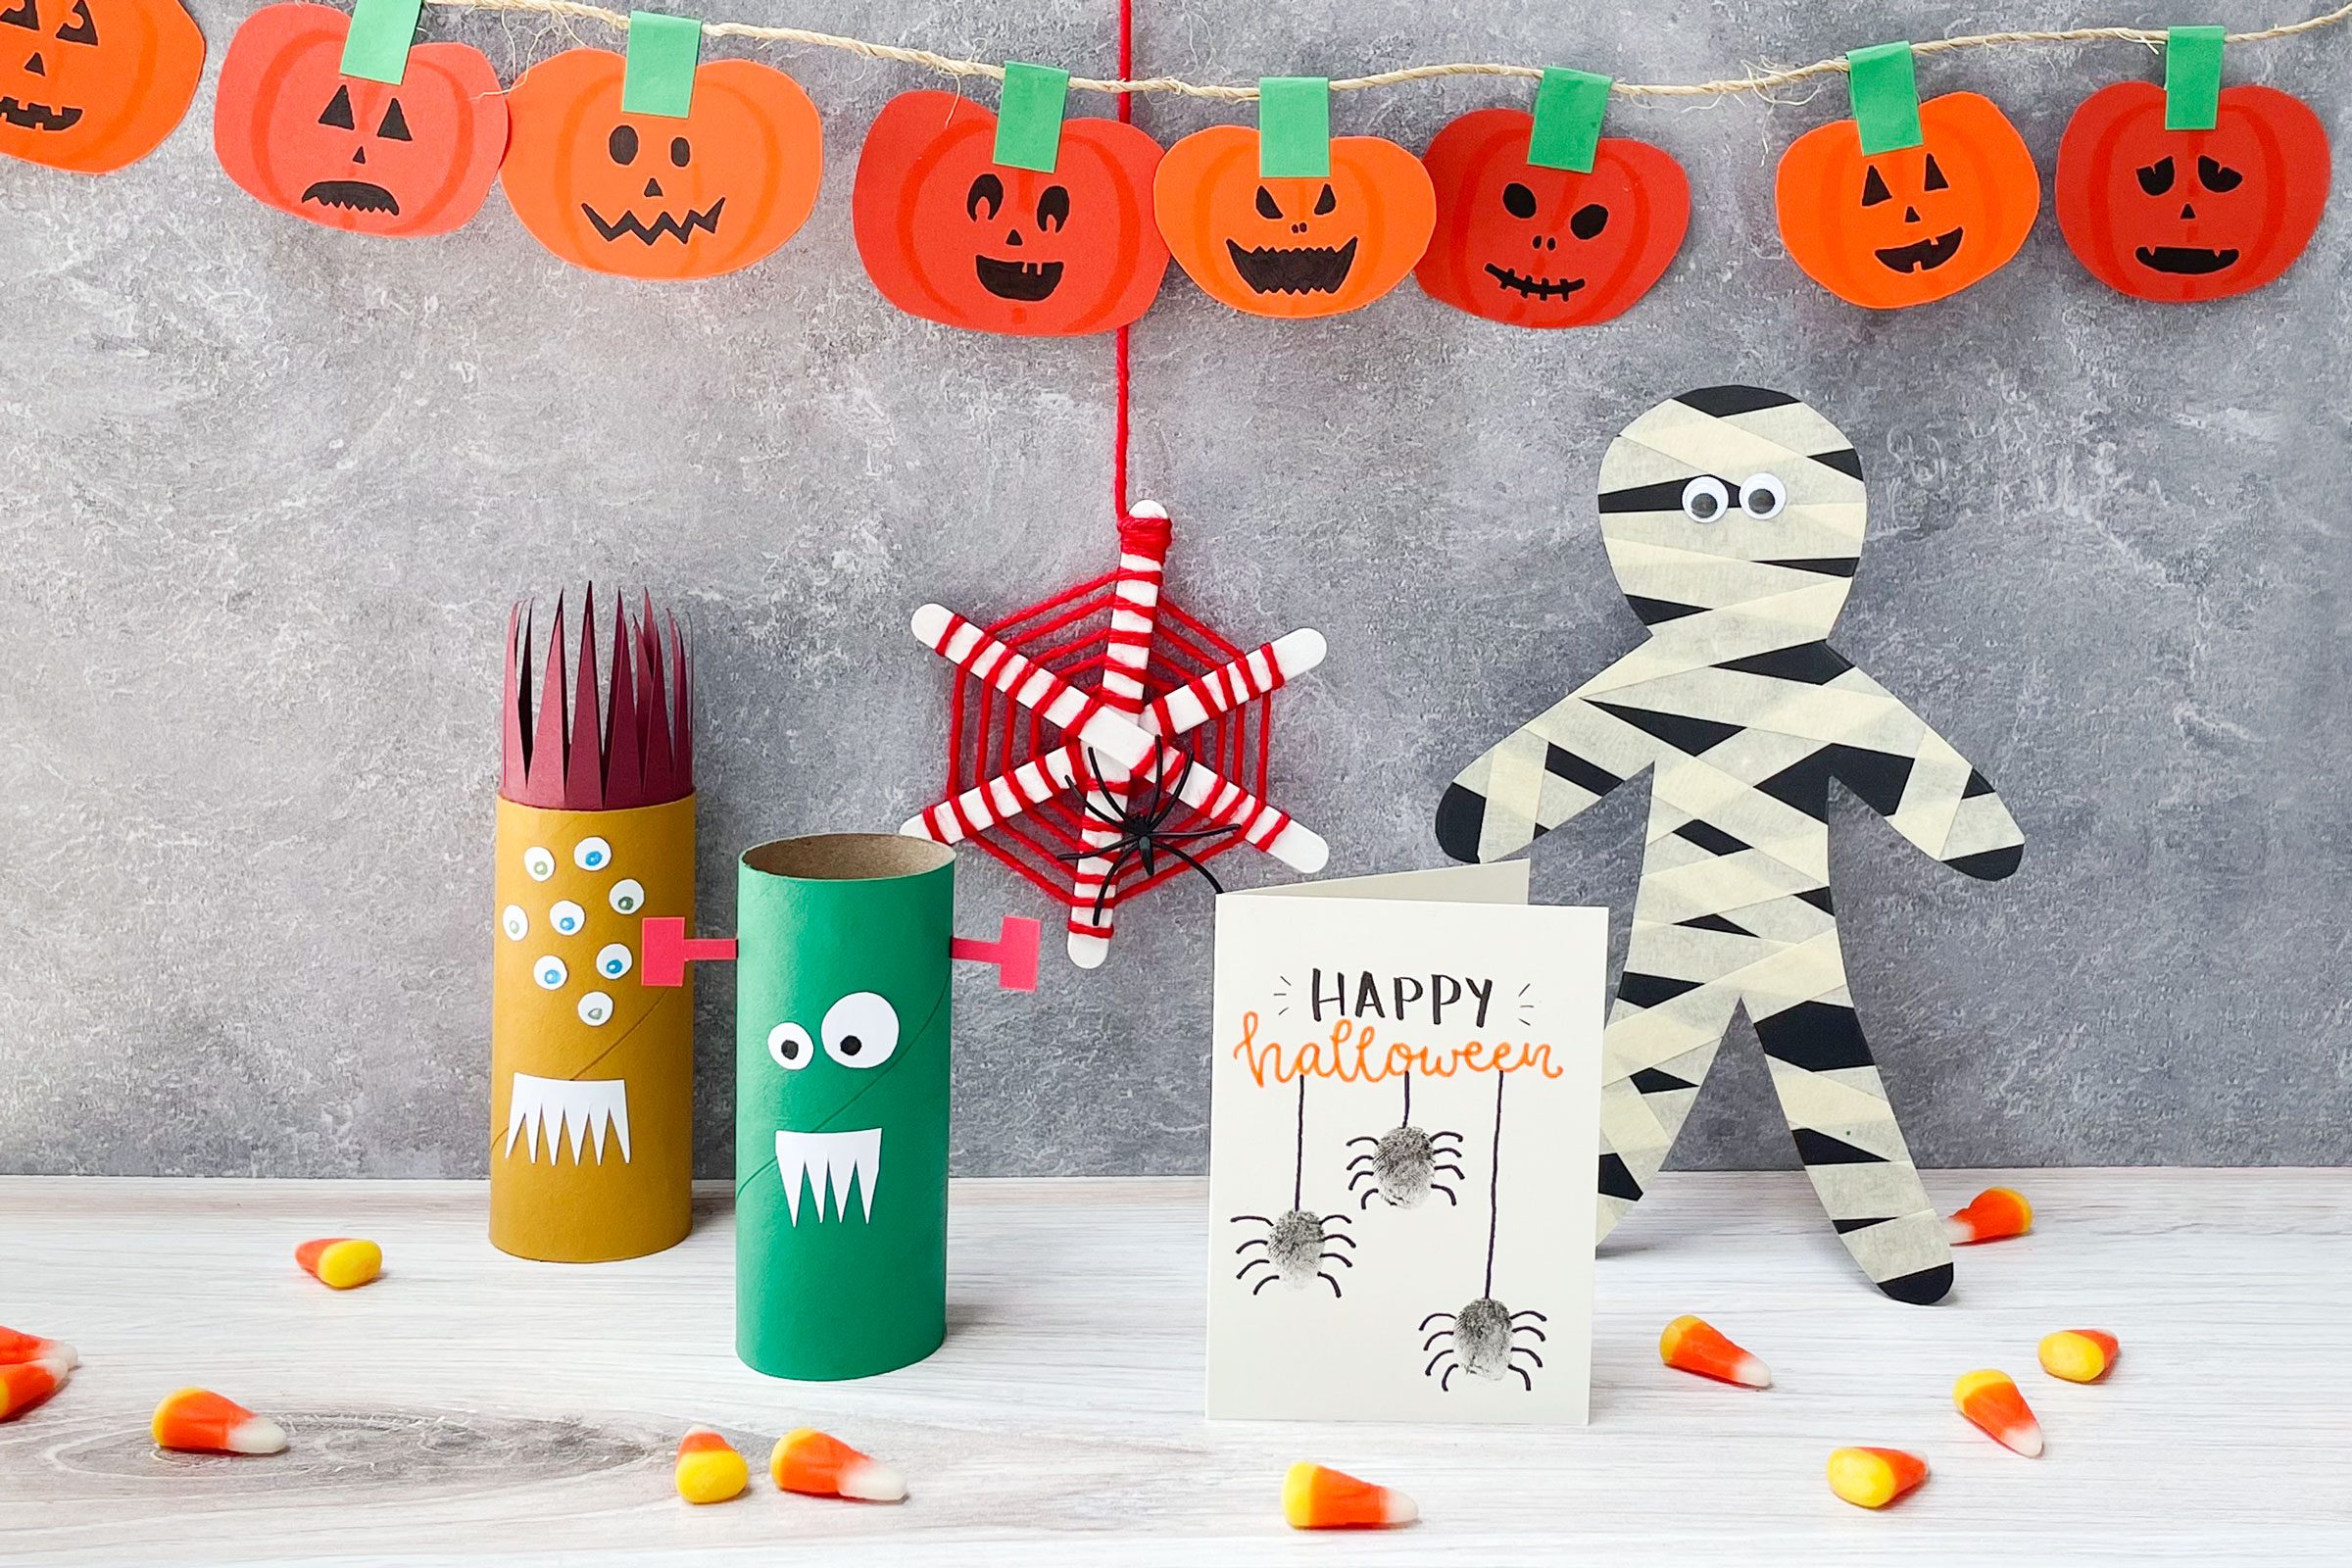 Halloween Inspiration: Silly Monster and Ghost Doors and more! - Green Kid  Crafts